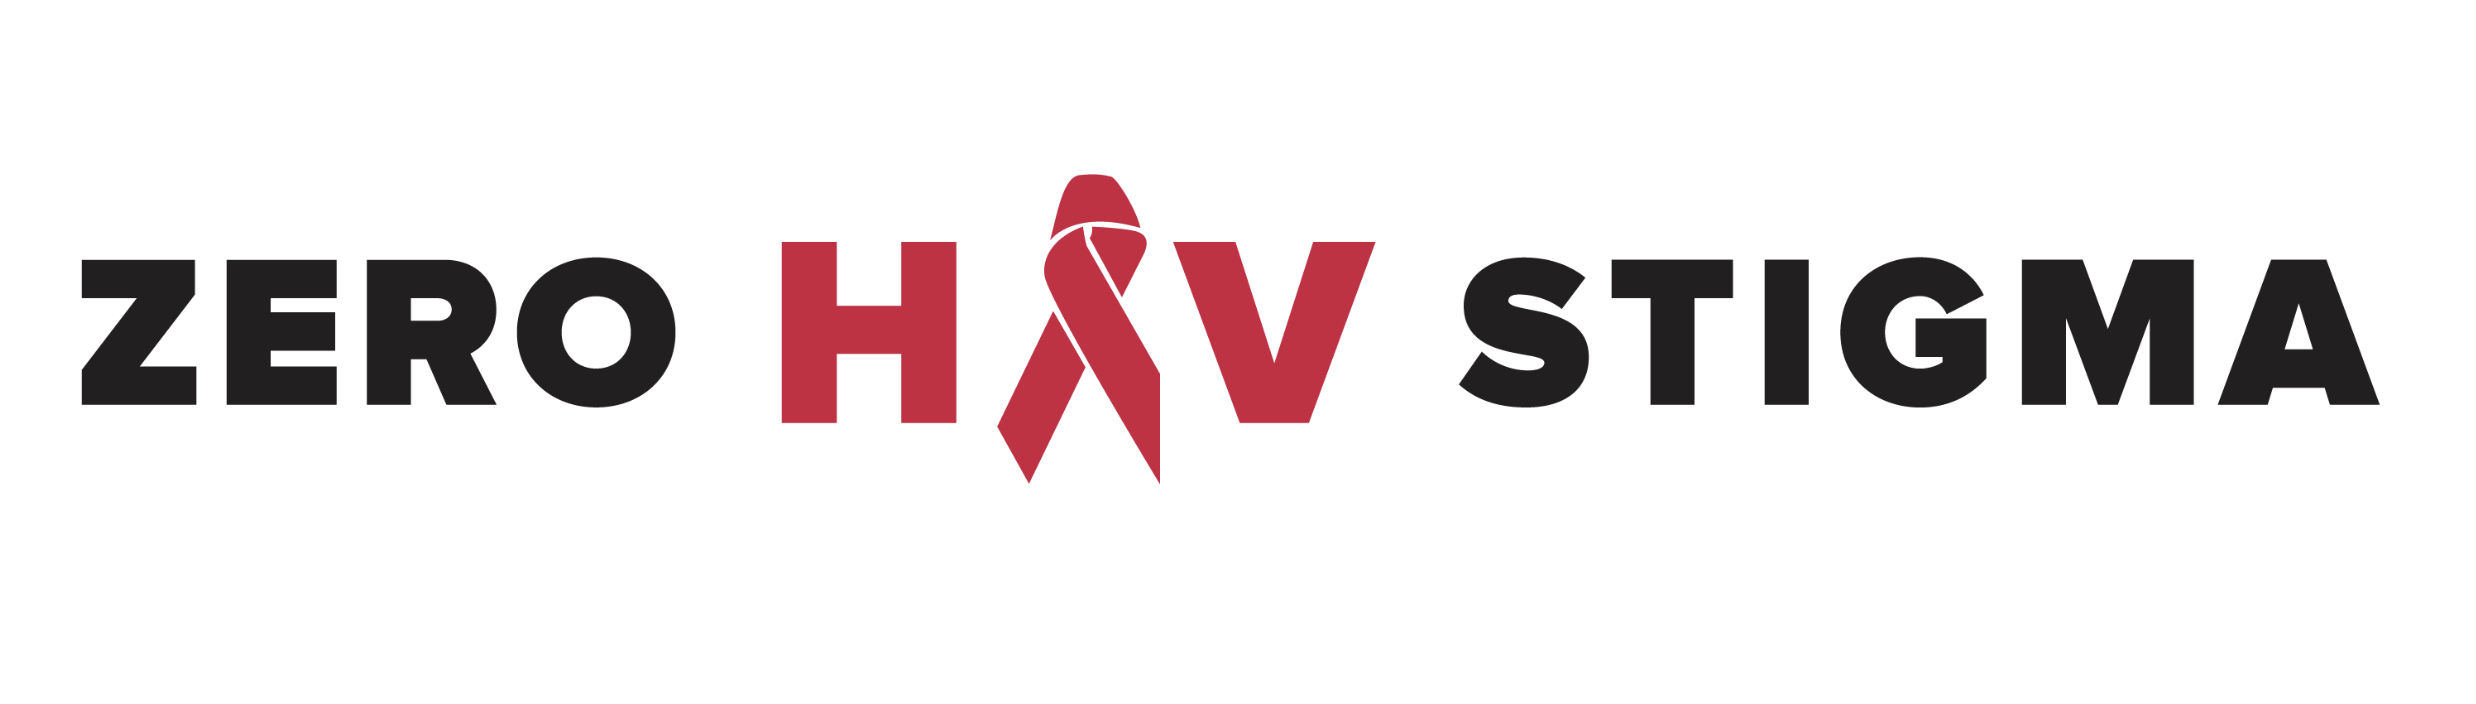 graphic with white background and black and red text that says "Zero HIV Stigma"